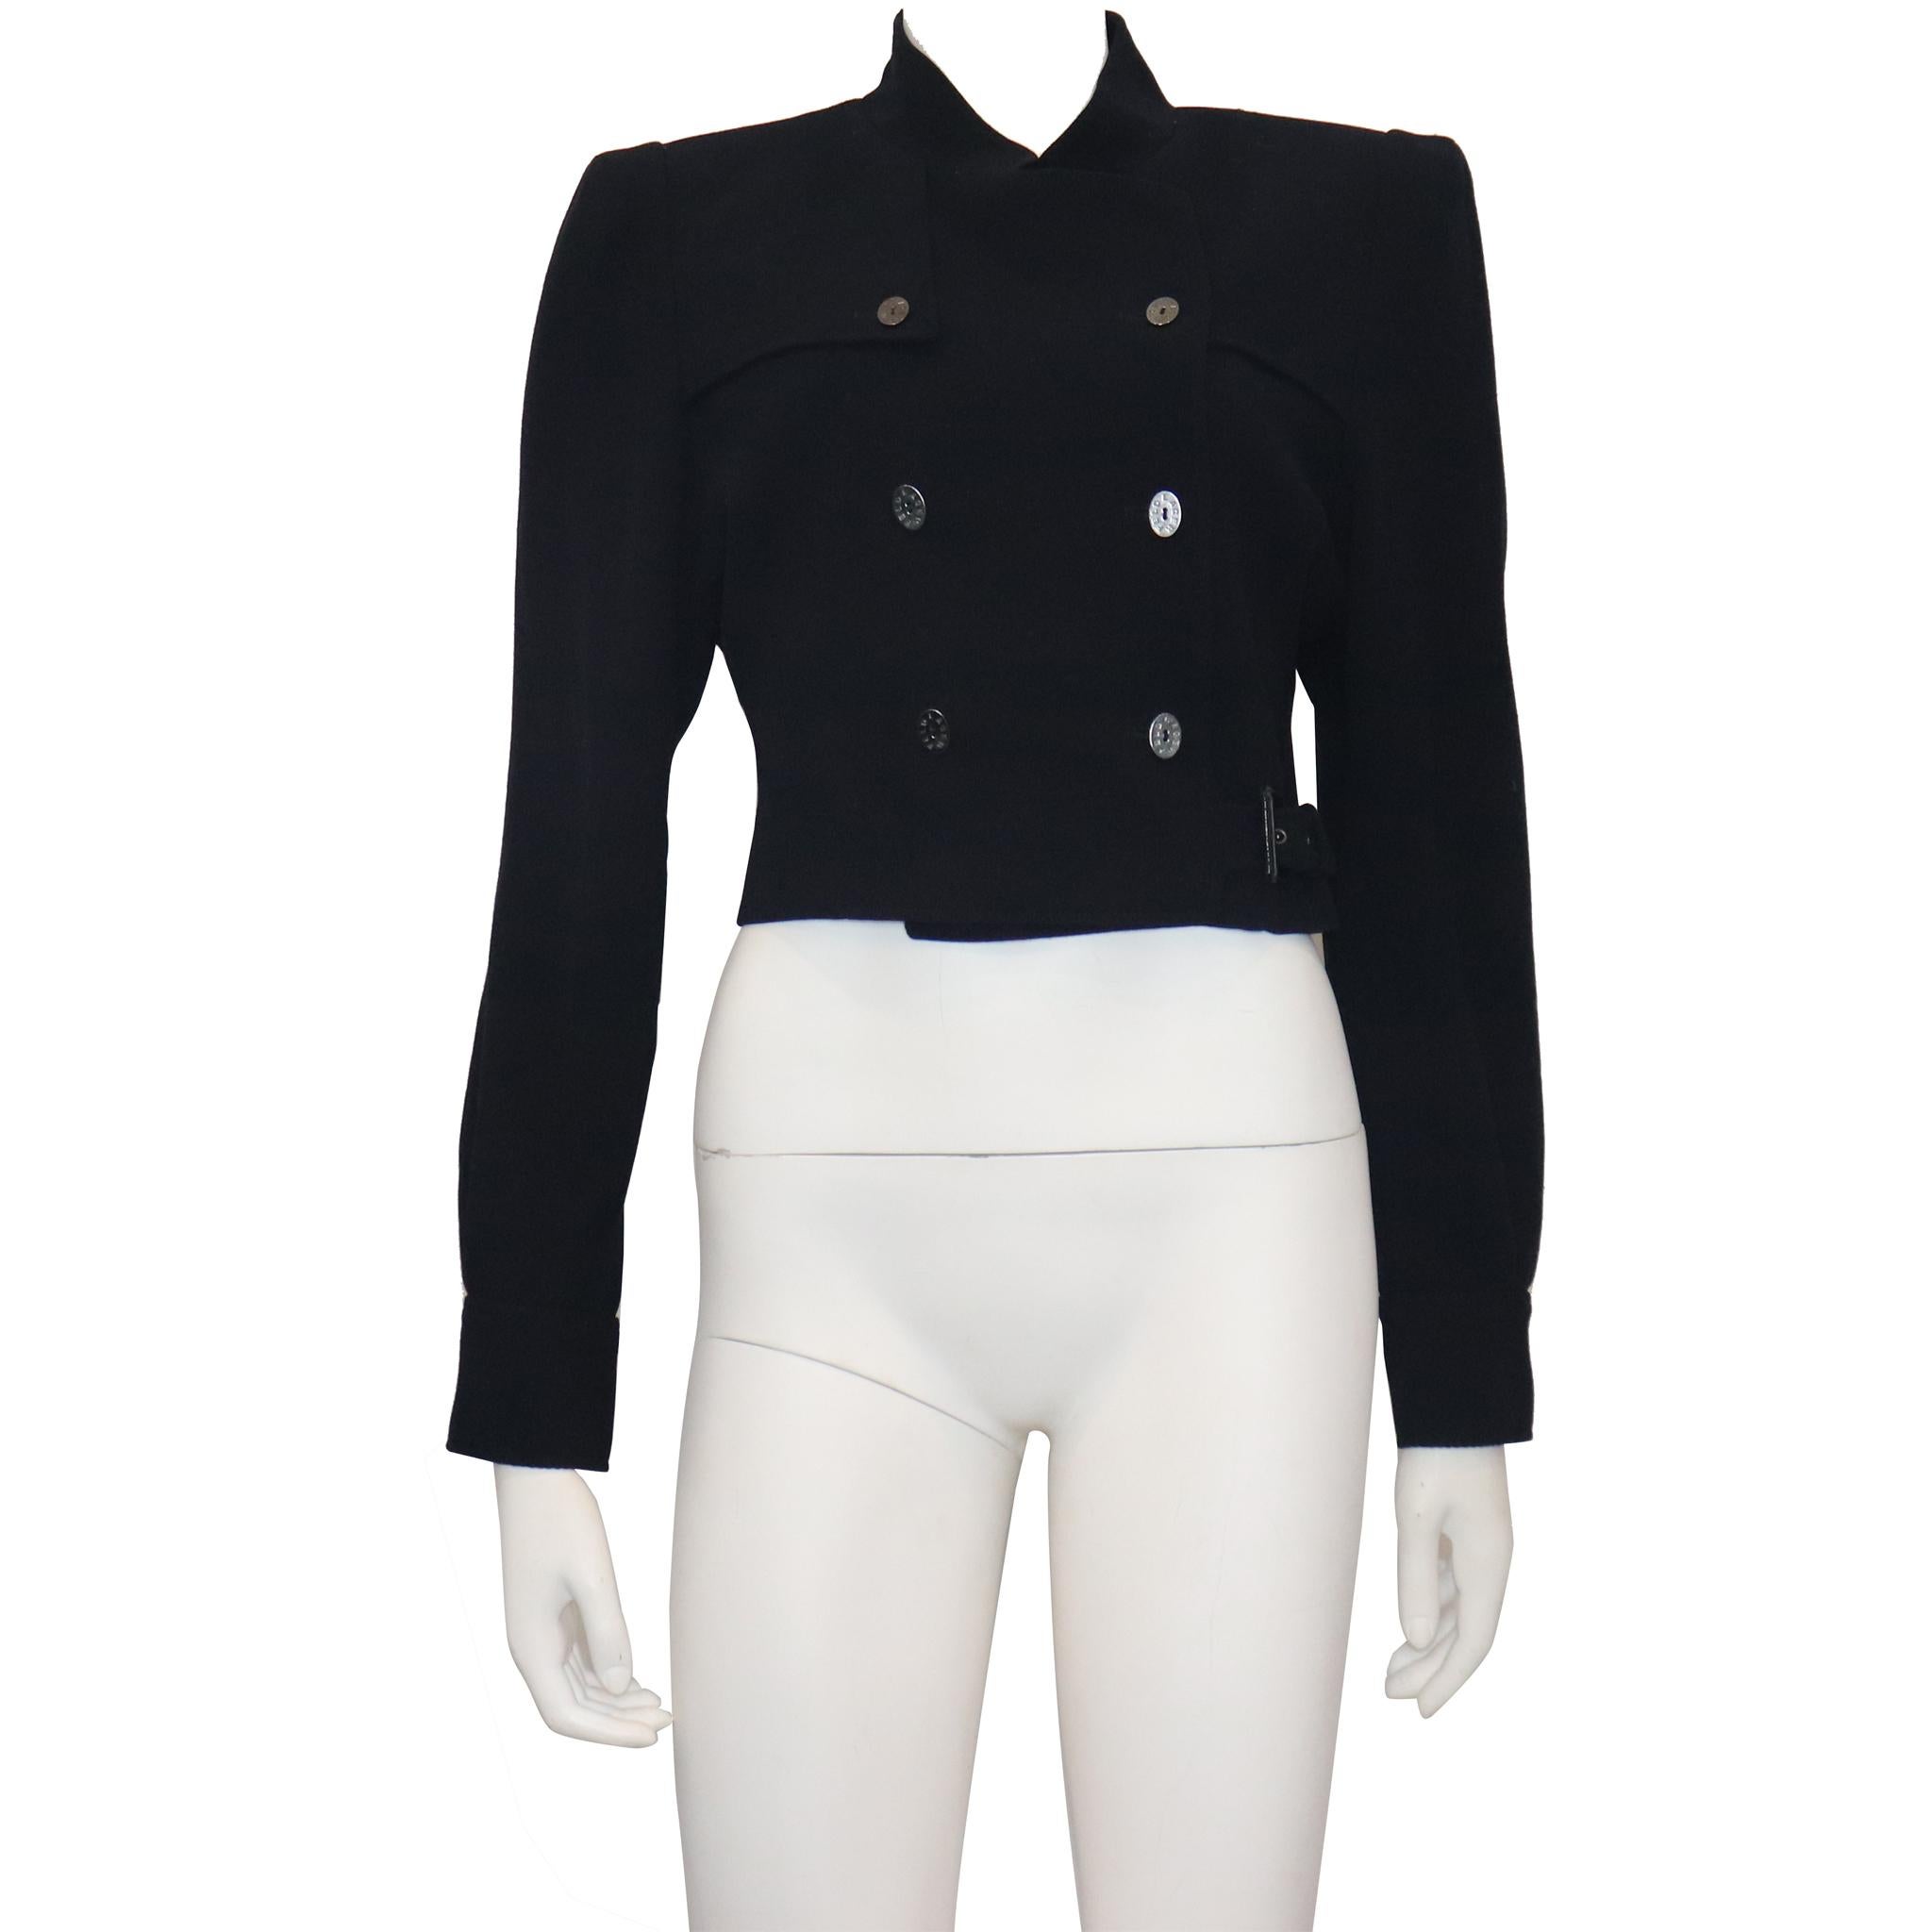 Karl Lagerfeld Navy Wool Jacket w/ Side Belt Circa 1990s. In excellent condition 

Measurements - 

Size 36 
Jacket Length: 19 Inches
Arm Length: 25 Inches